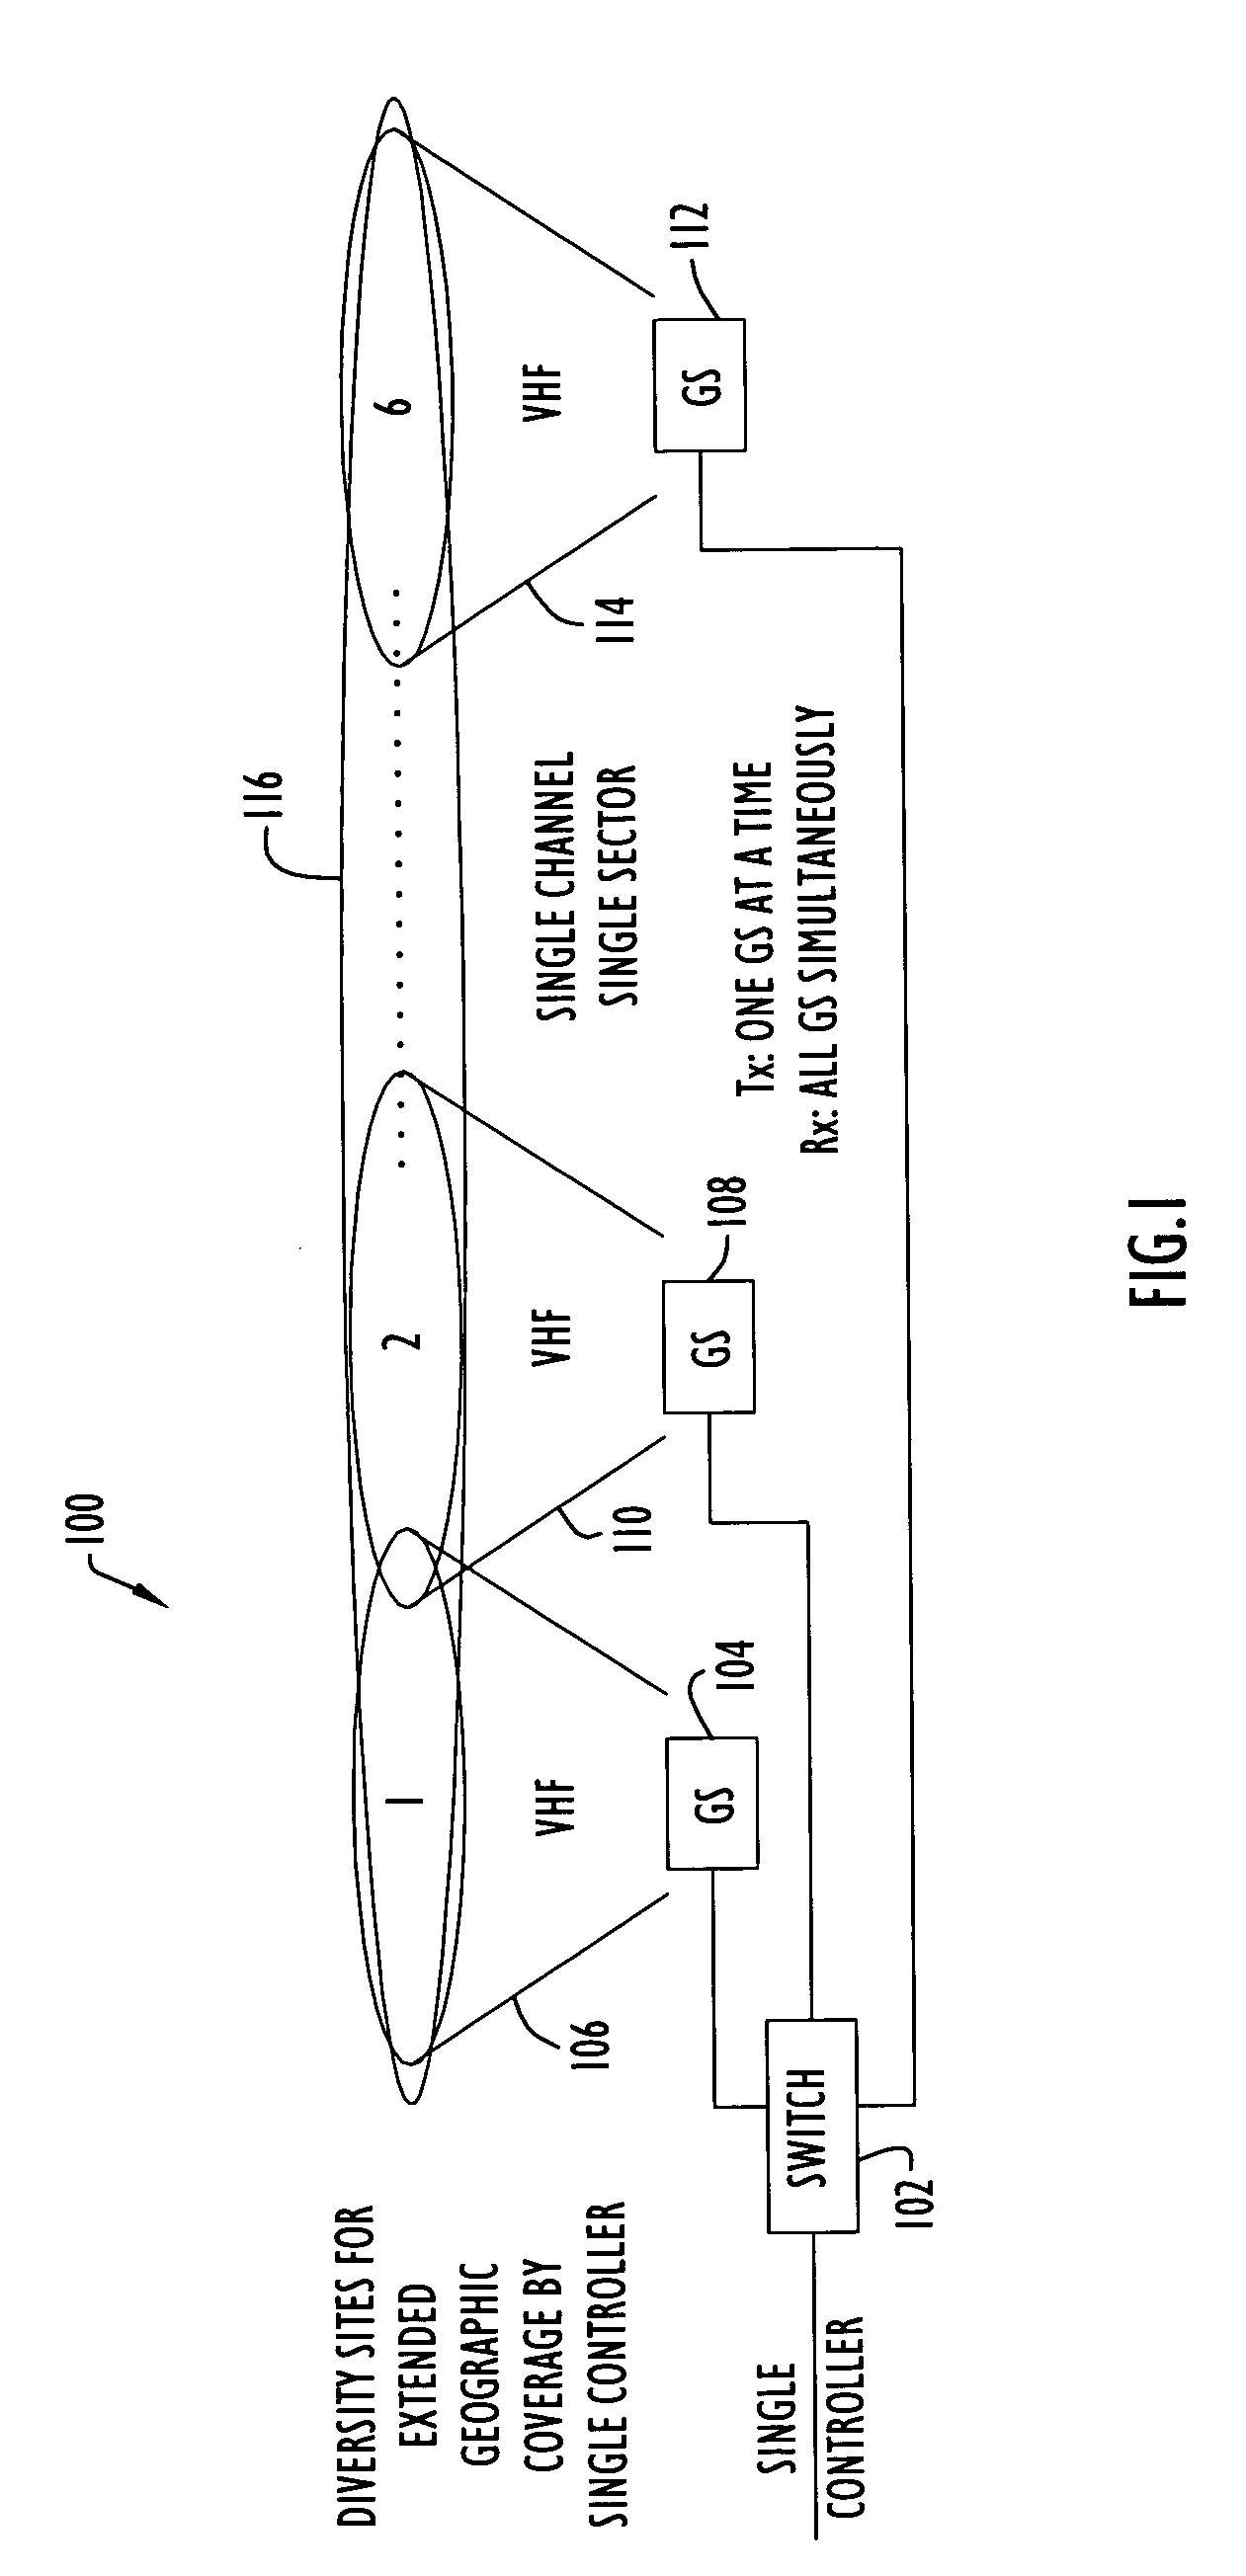 Method for diversity site group operations in air/ground communications